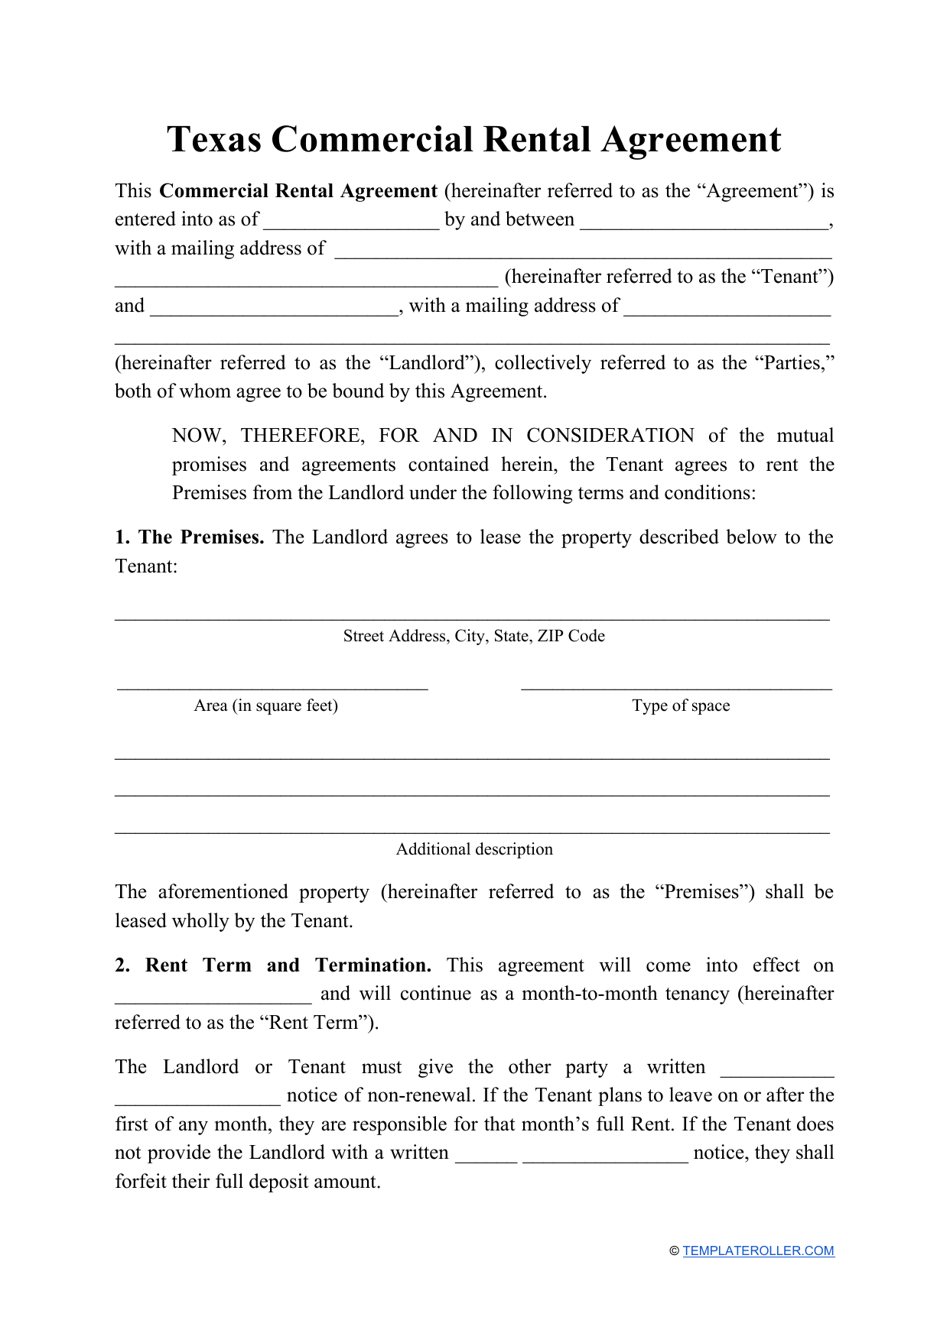 Texas Commercial Rental Agreement Template Fill Out Sign Online And Download Pdf Templateroller 6110